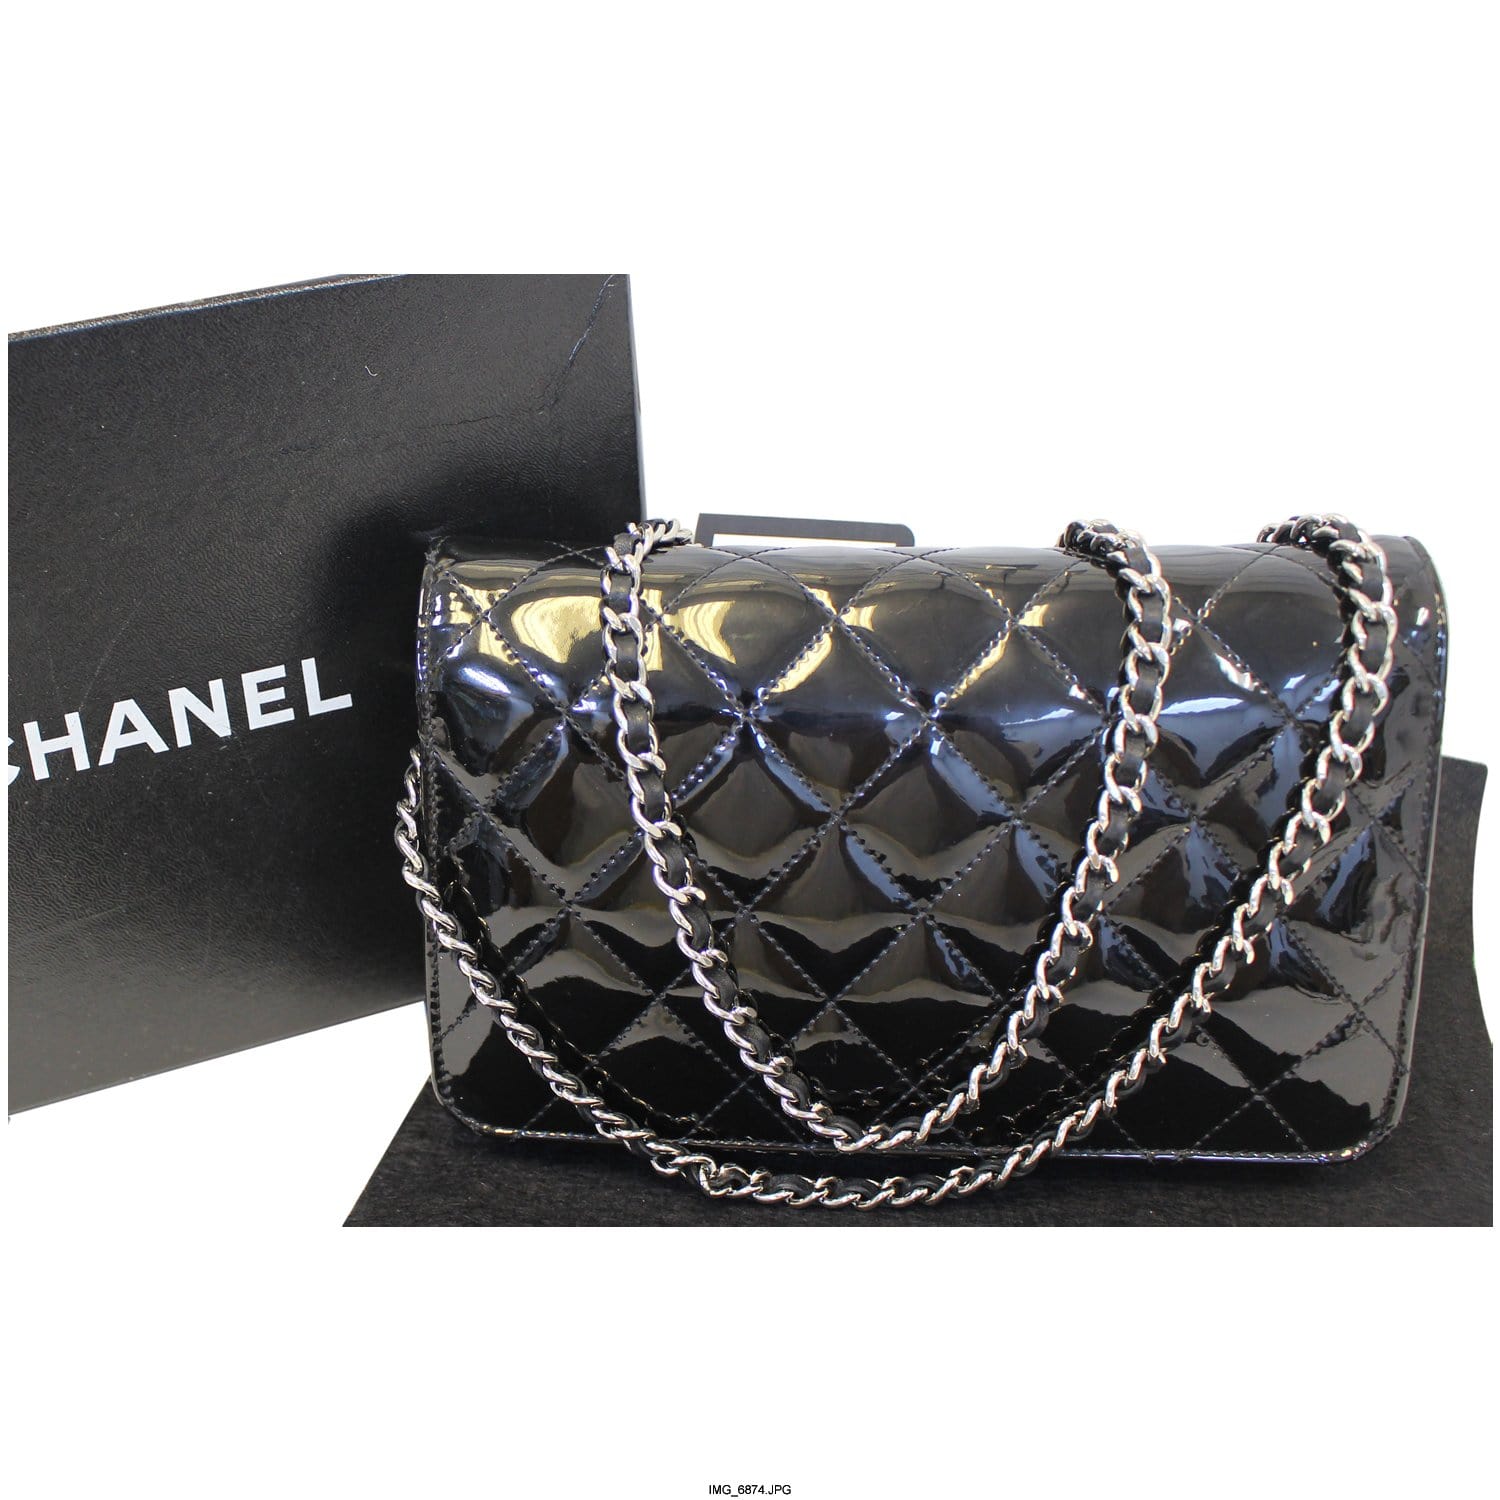 ❤️ Loved Chanel Black Patent Shoulder Bag - Tag Included From Neiman Marcus